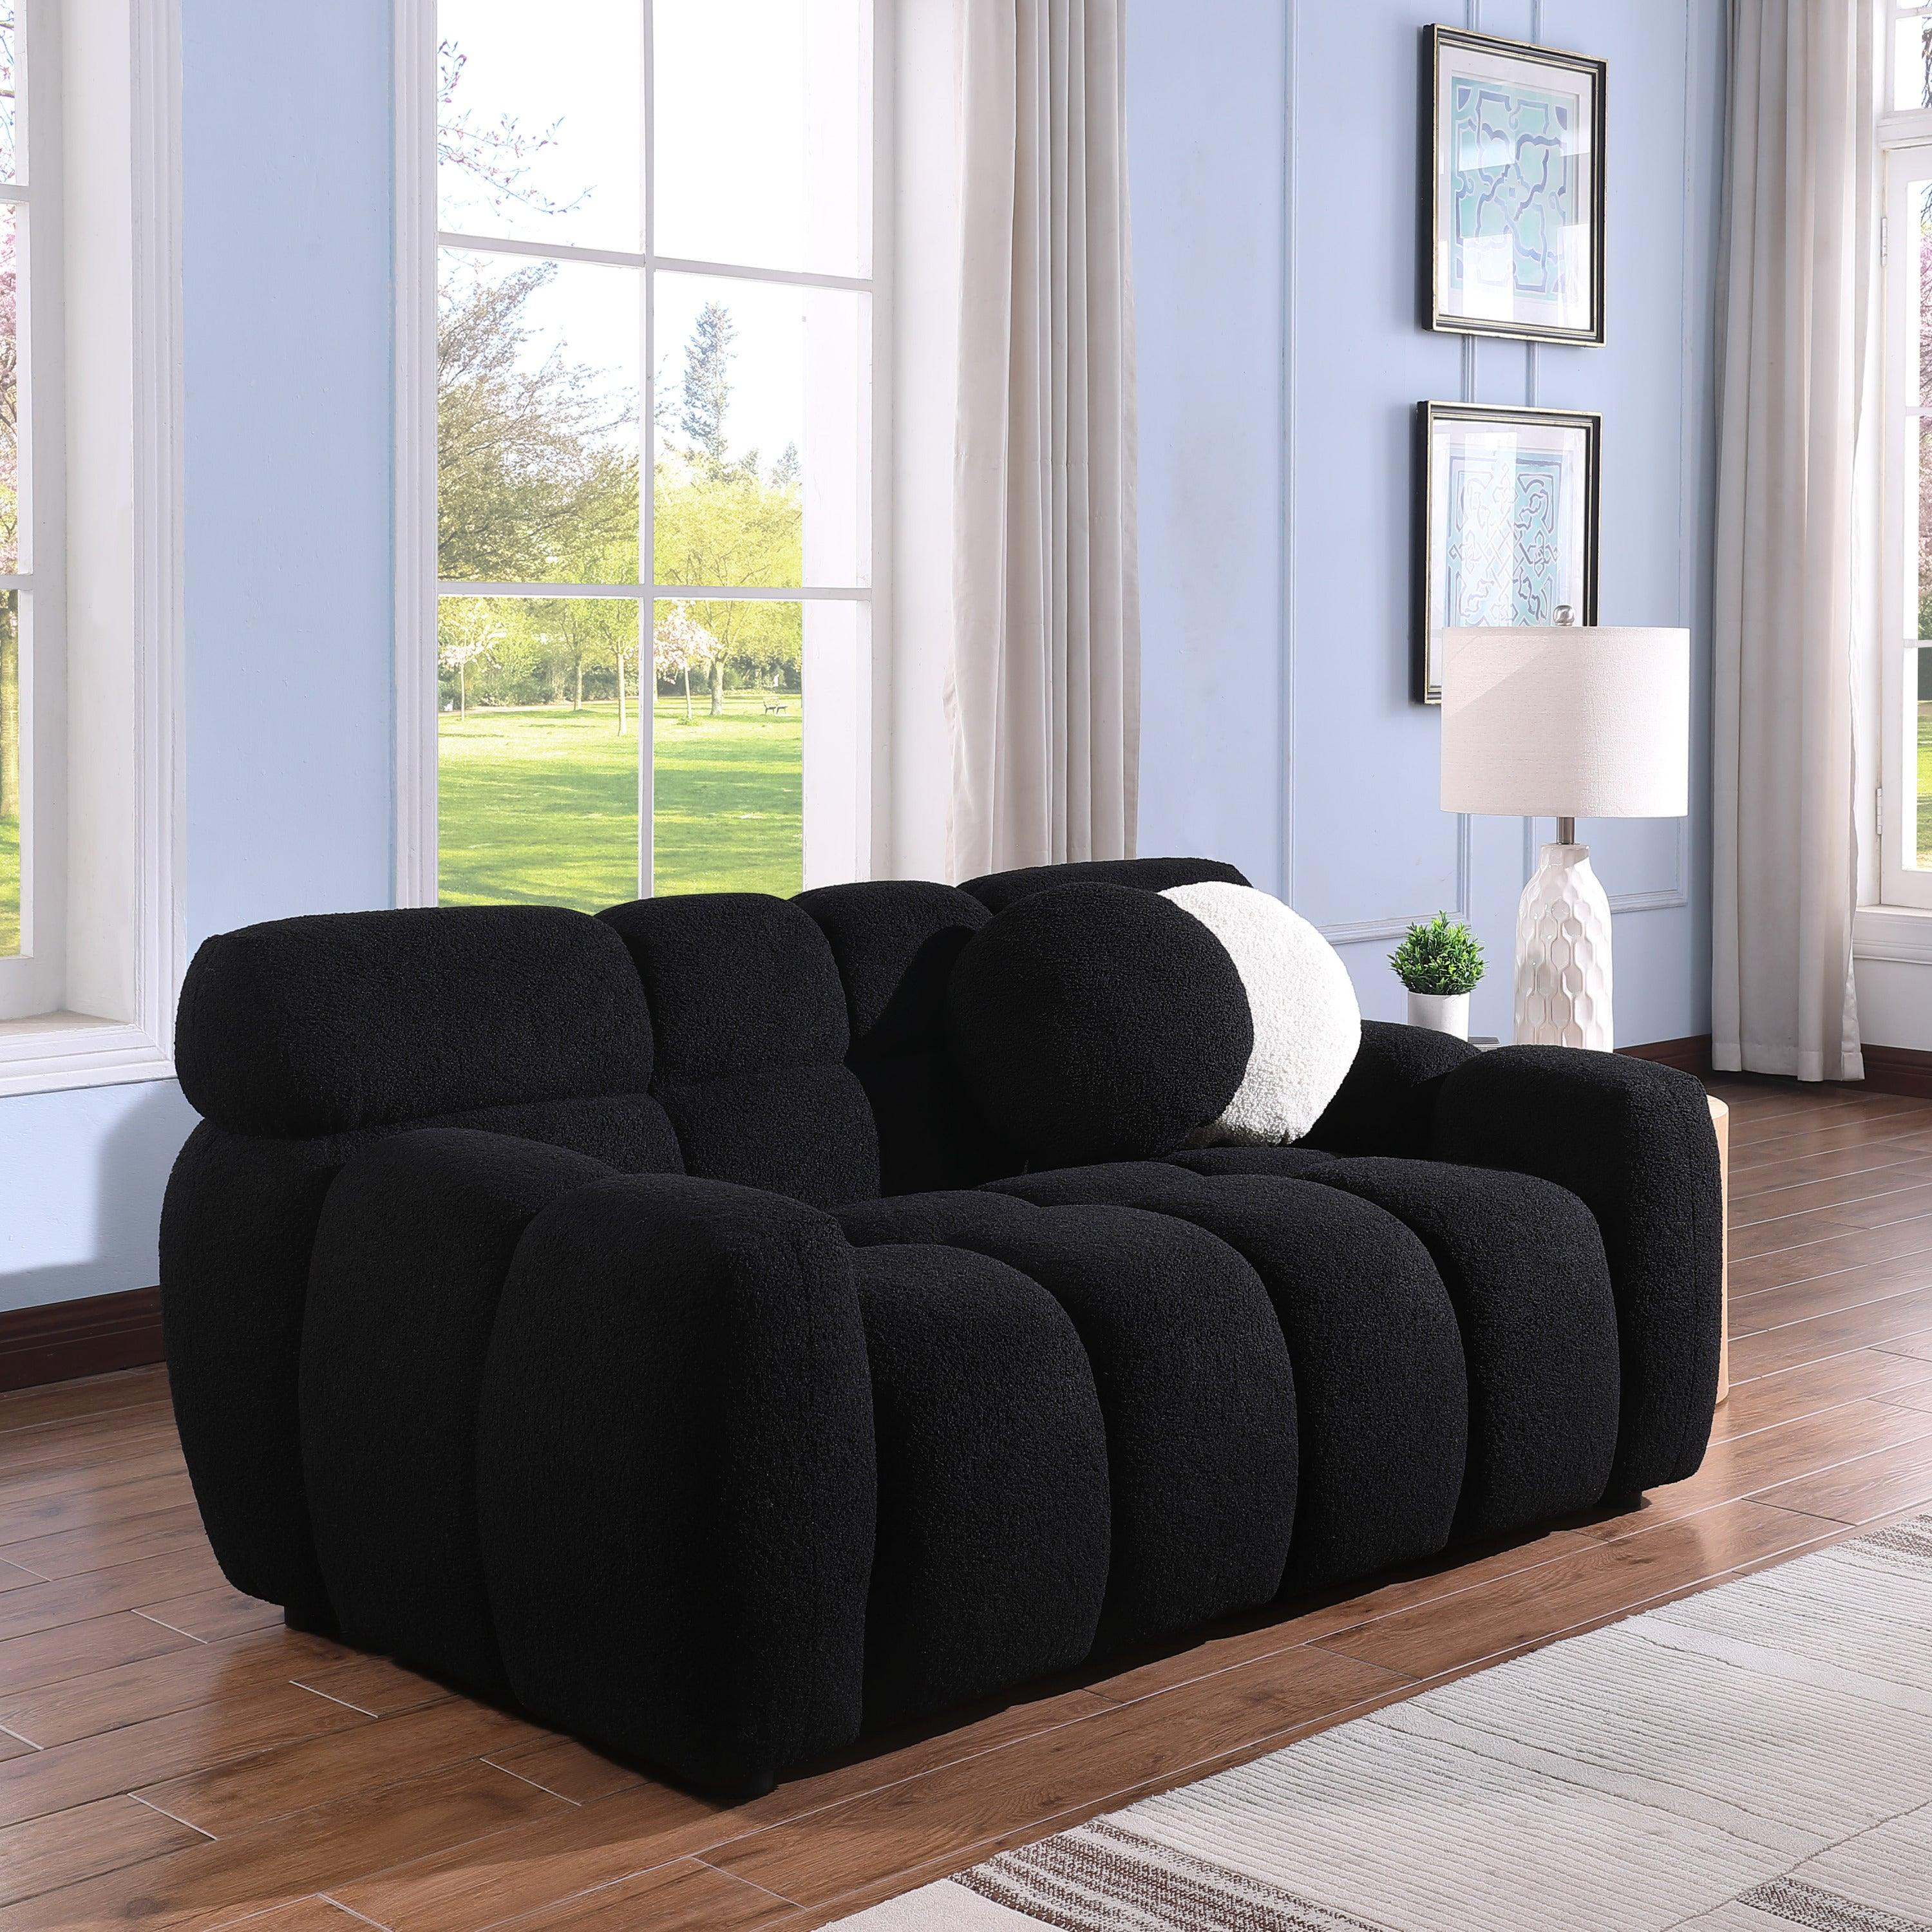 🆓🚛 64.96 Length, 35.83" Deepth, Human Body Structure for Usa People, Marshmallow Sofa, Boucle Sofa, 2 Seater, Black